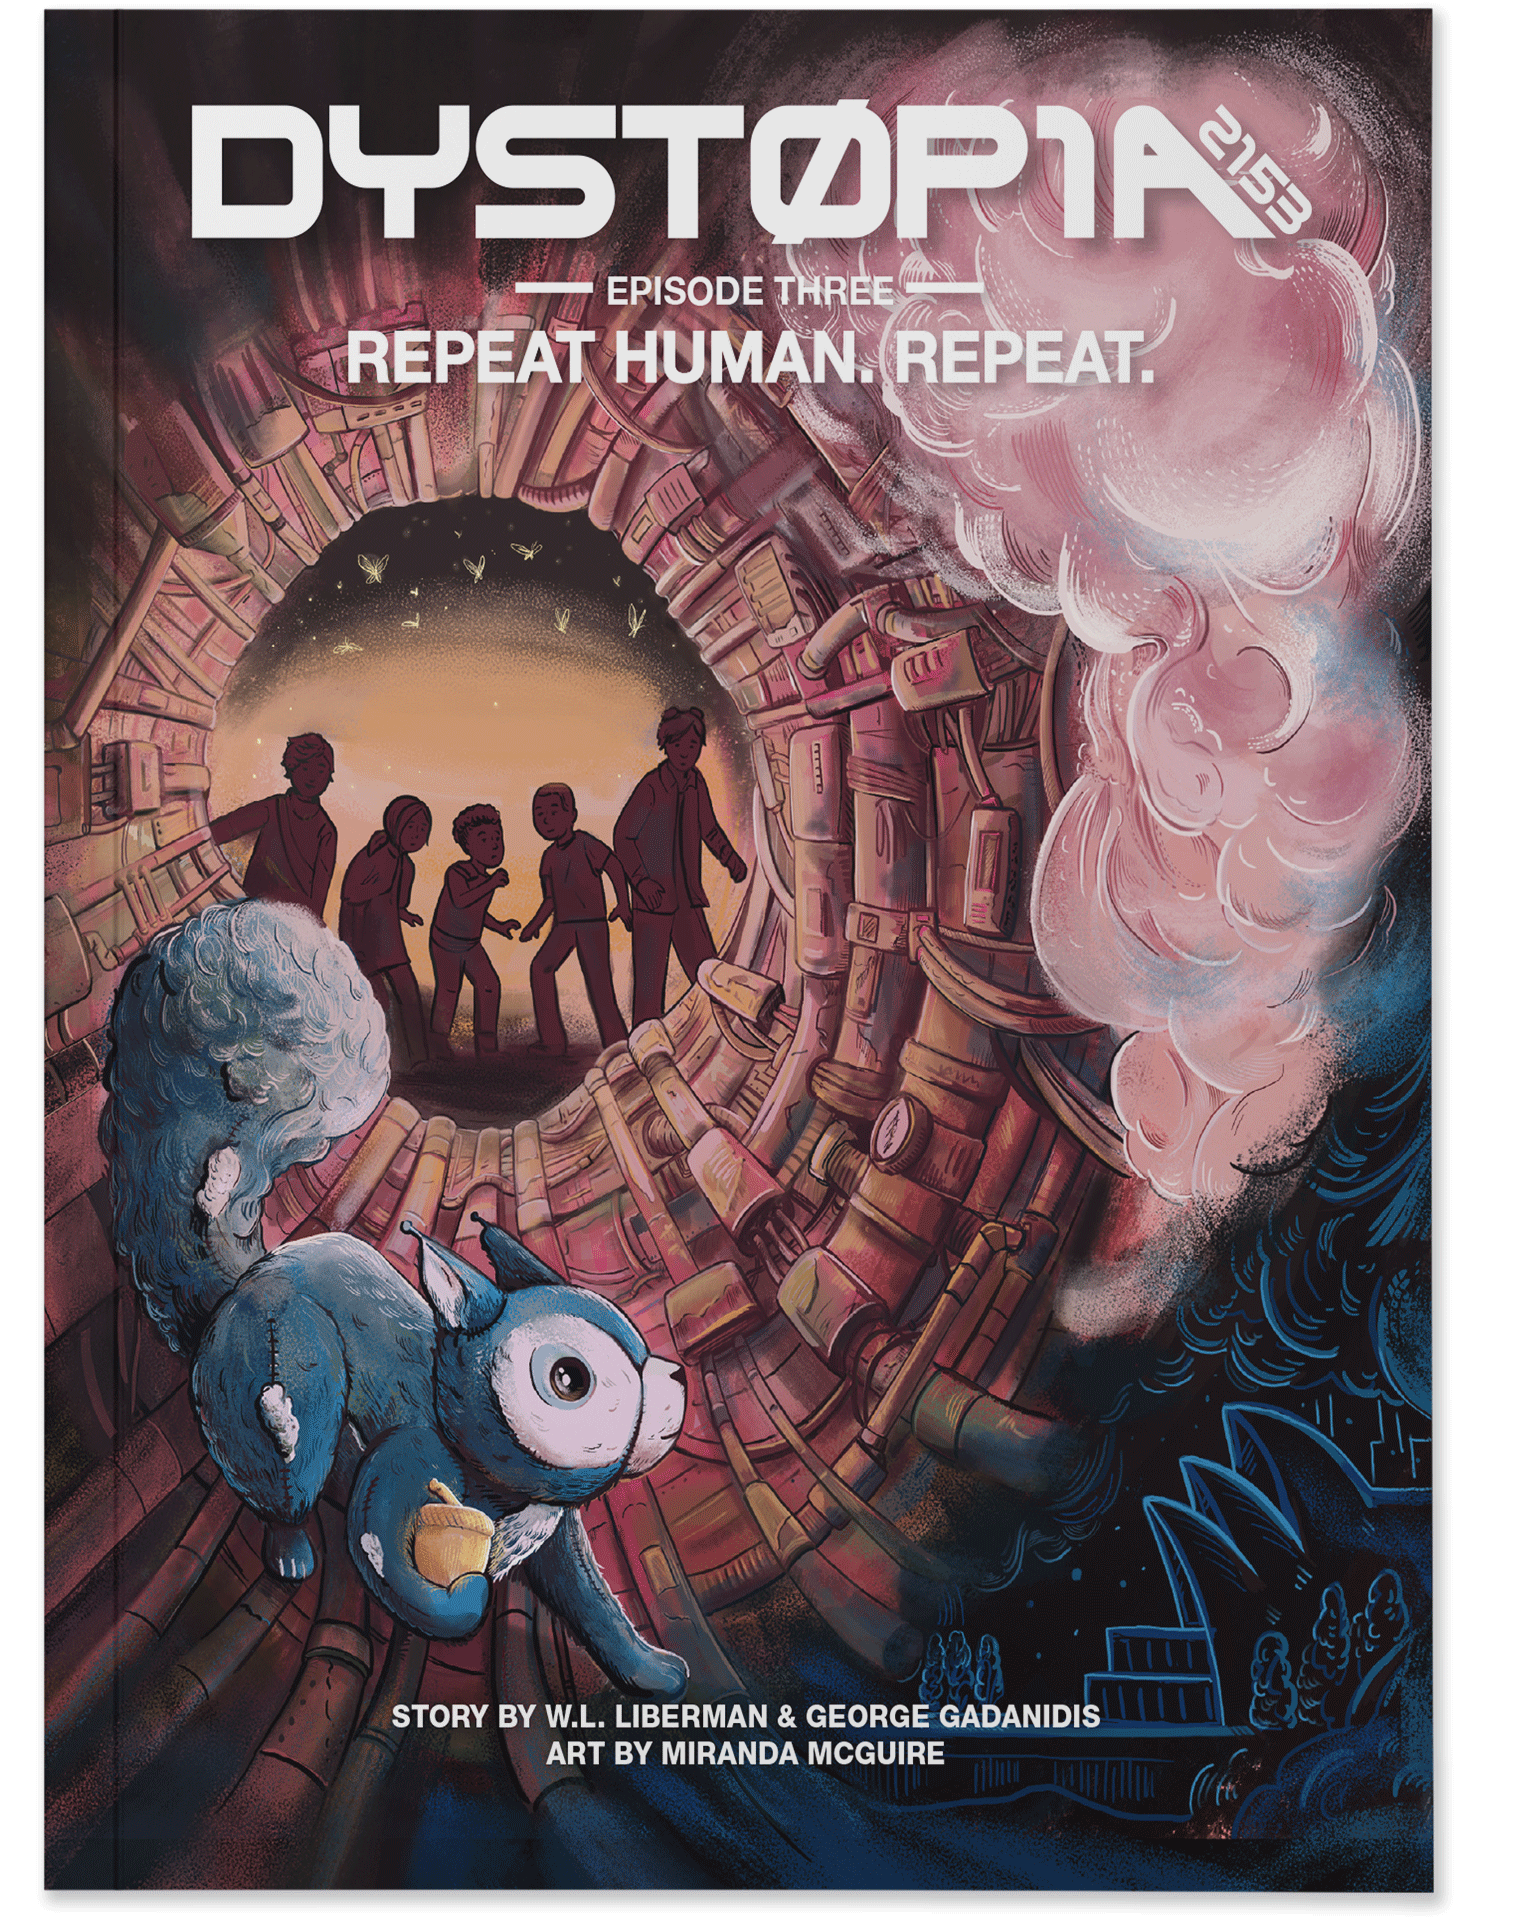 Cover of Dystopia 2153 Episode Three Graphic Novel Book